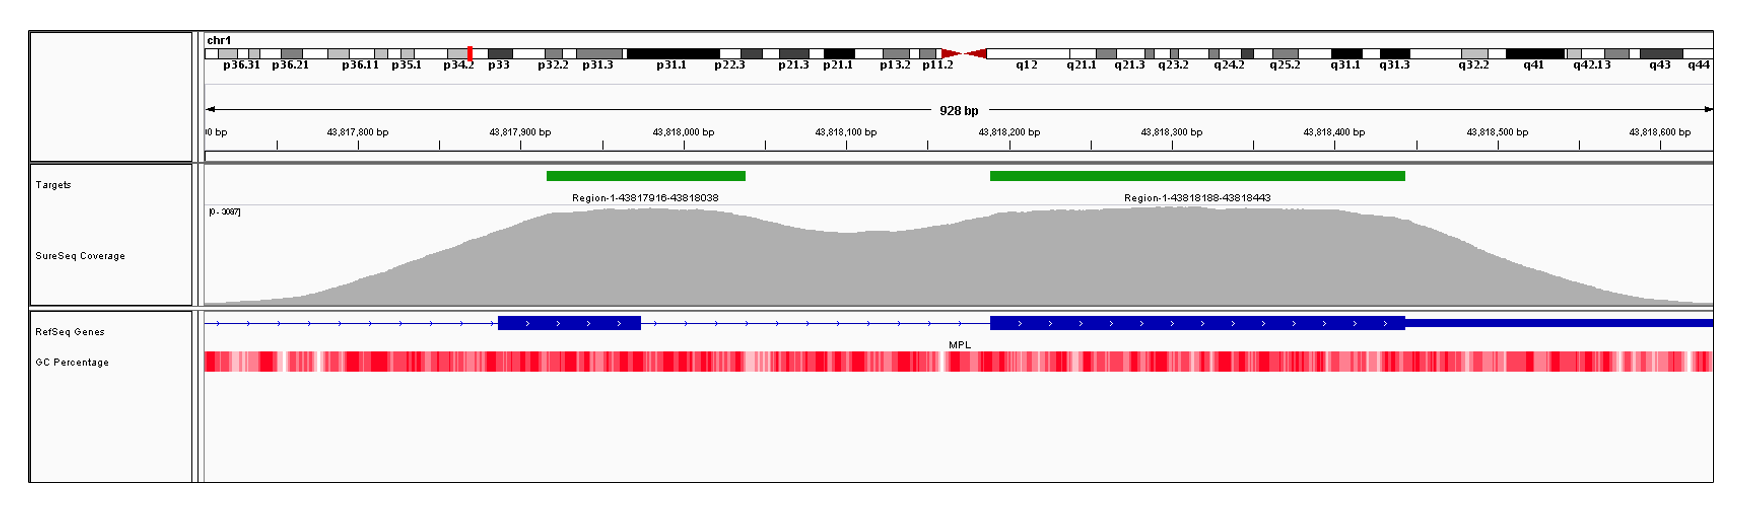 MPL Exons 11 (chr1:43817887-43817974) and 12 (hg19 chr1:43818189-43820135). Depth of coverage per base (grey). Targeted region (green). Gene coding region as defined by RefSeq (blue). GC percentage (red). Image